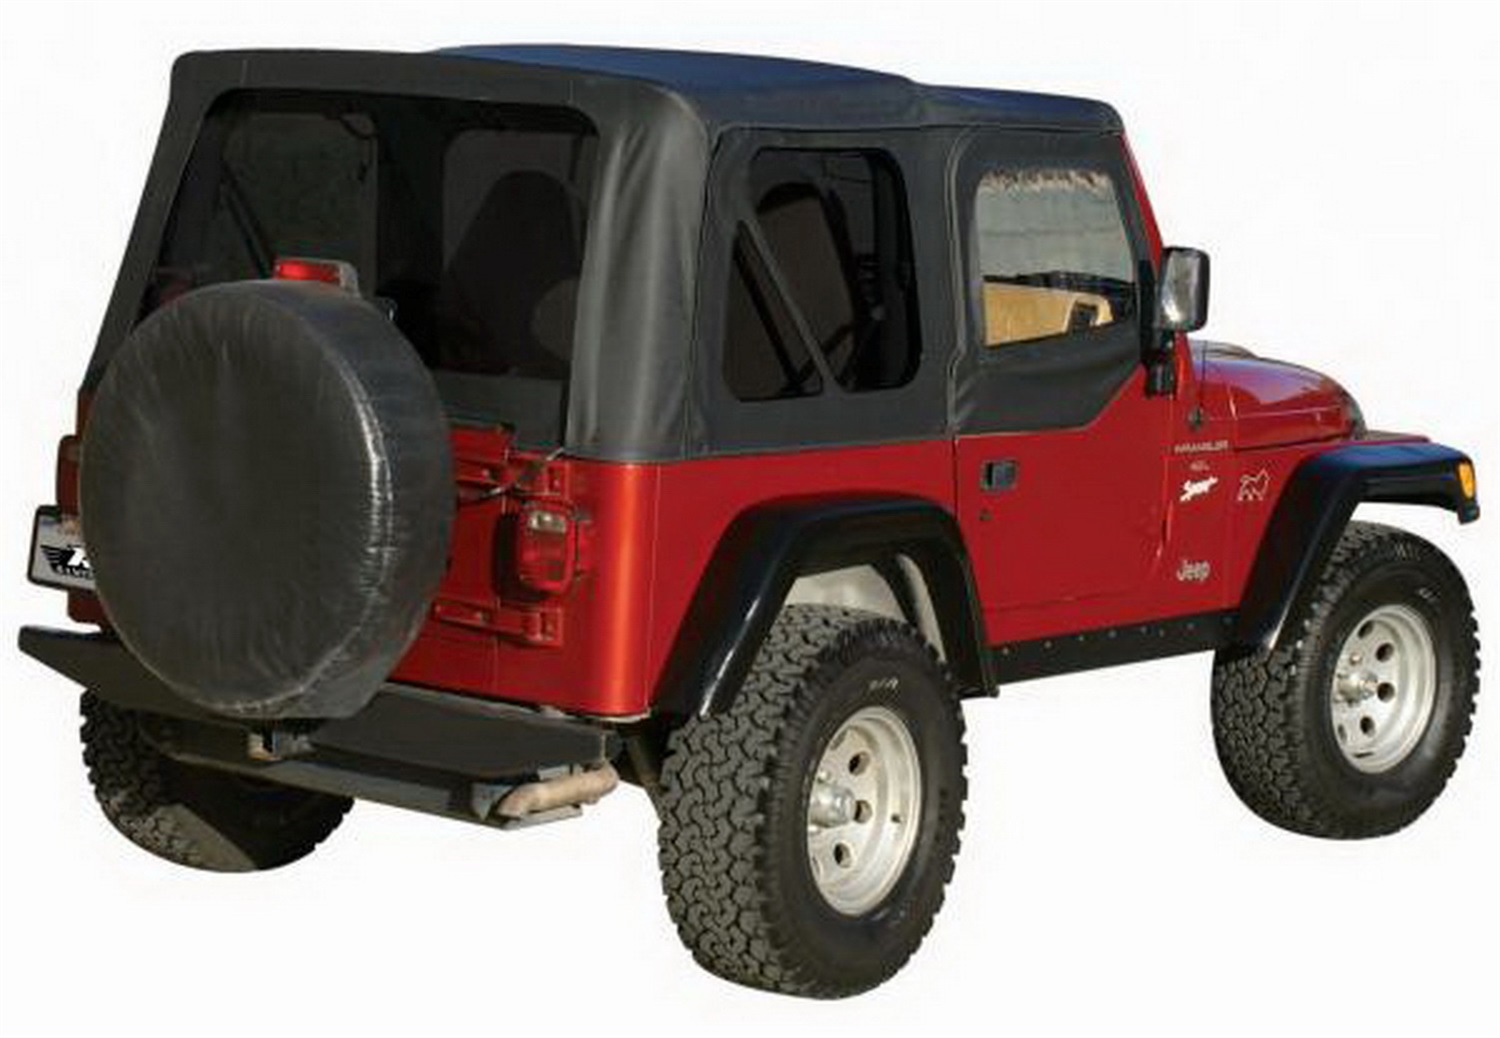 Rampage Rampage 99515 Factory Replacement Soft Top Fits 97-06 Wrangler (TJ)